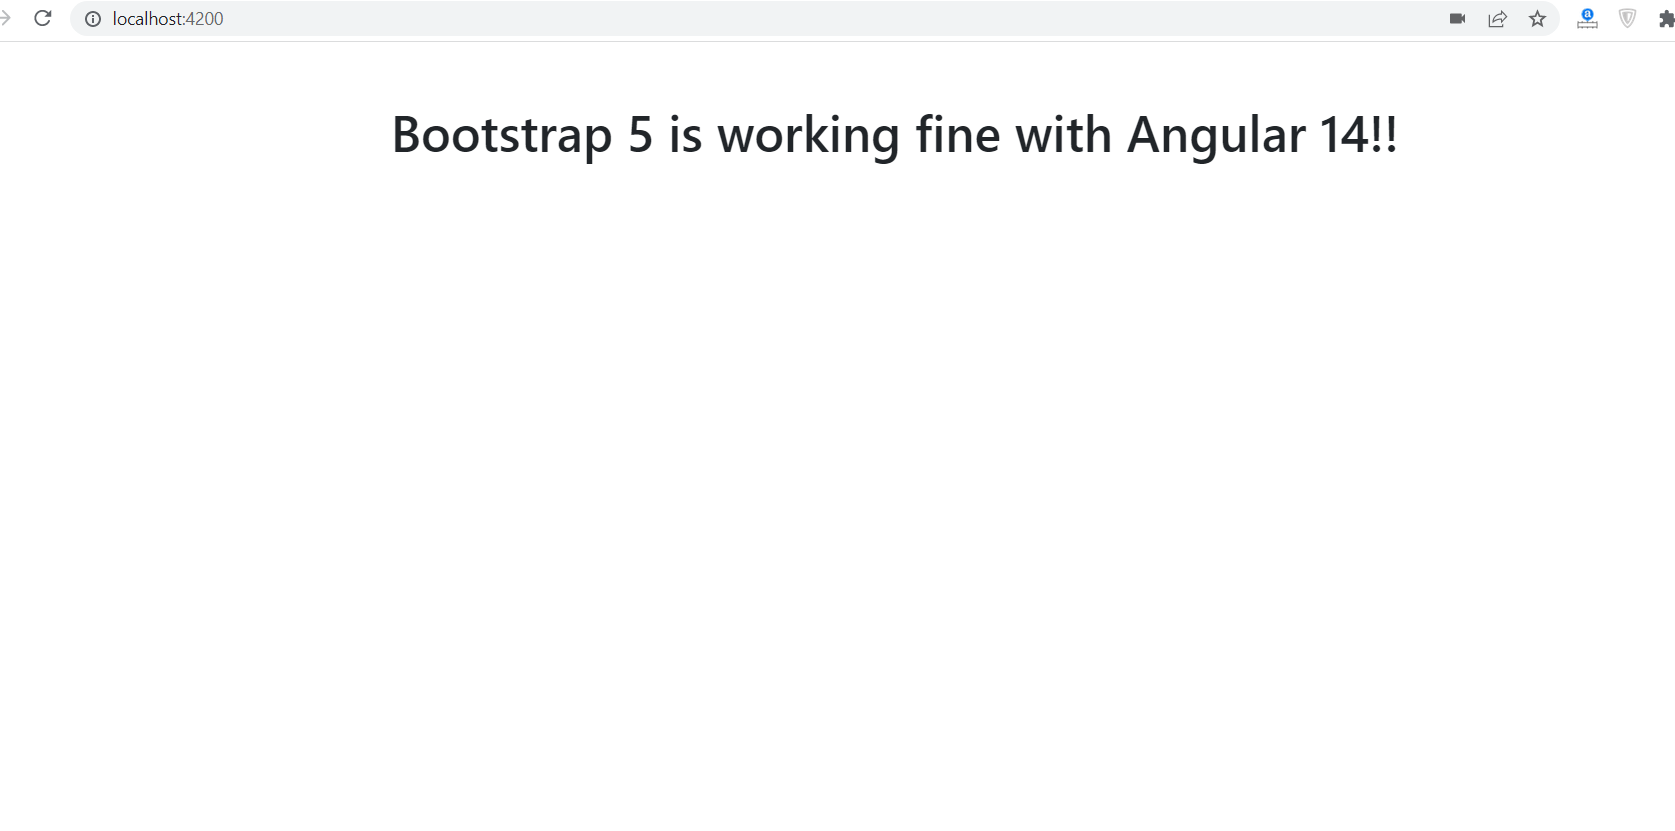 How to add bootstrap 5 in Angular 14?